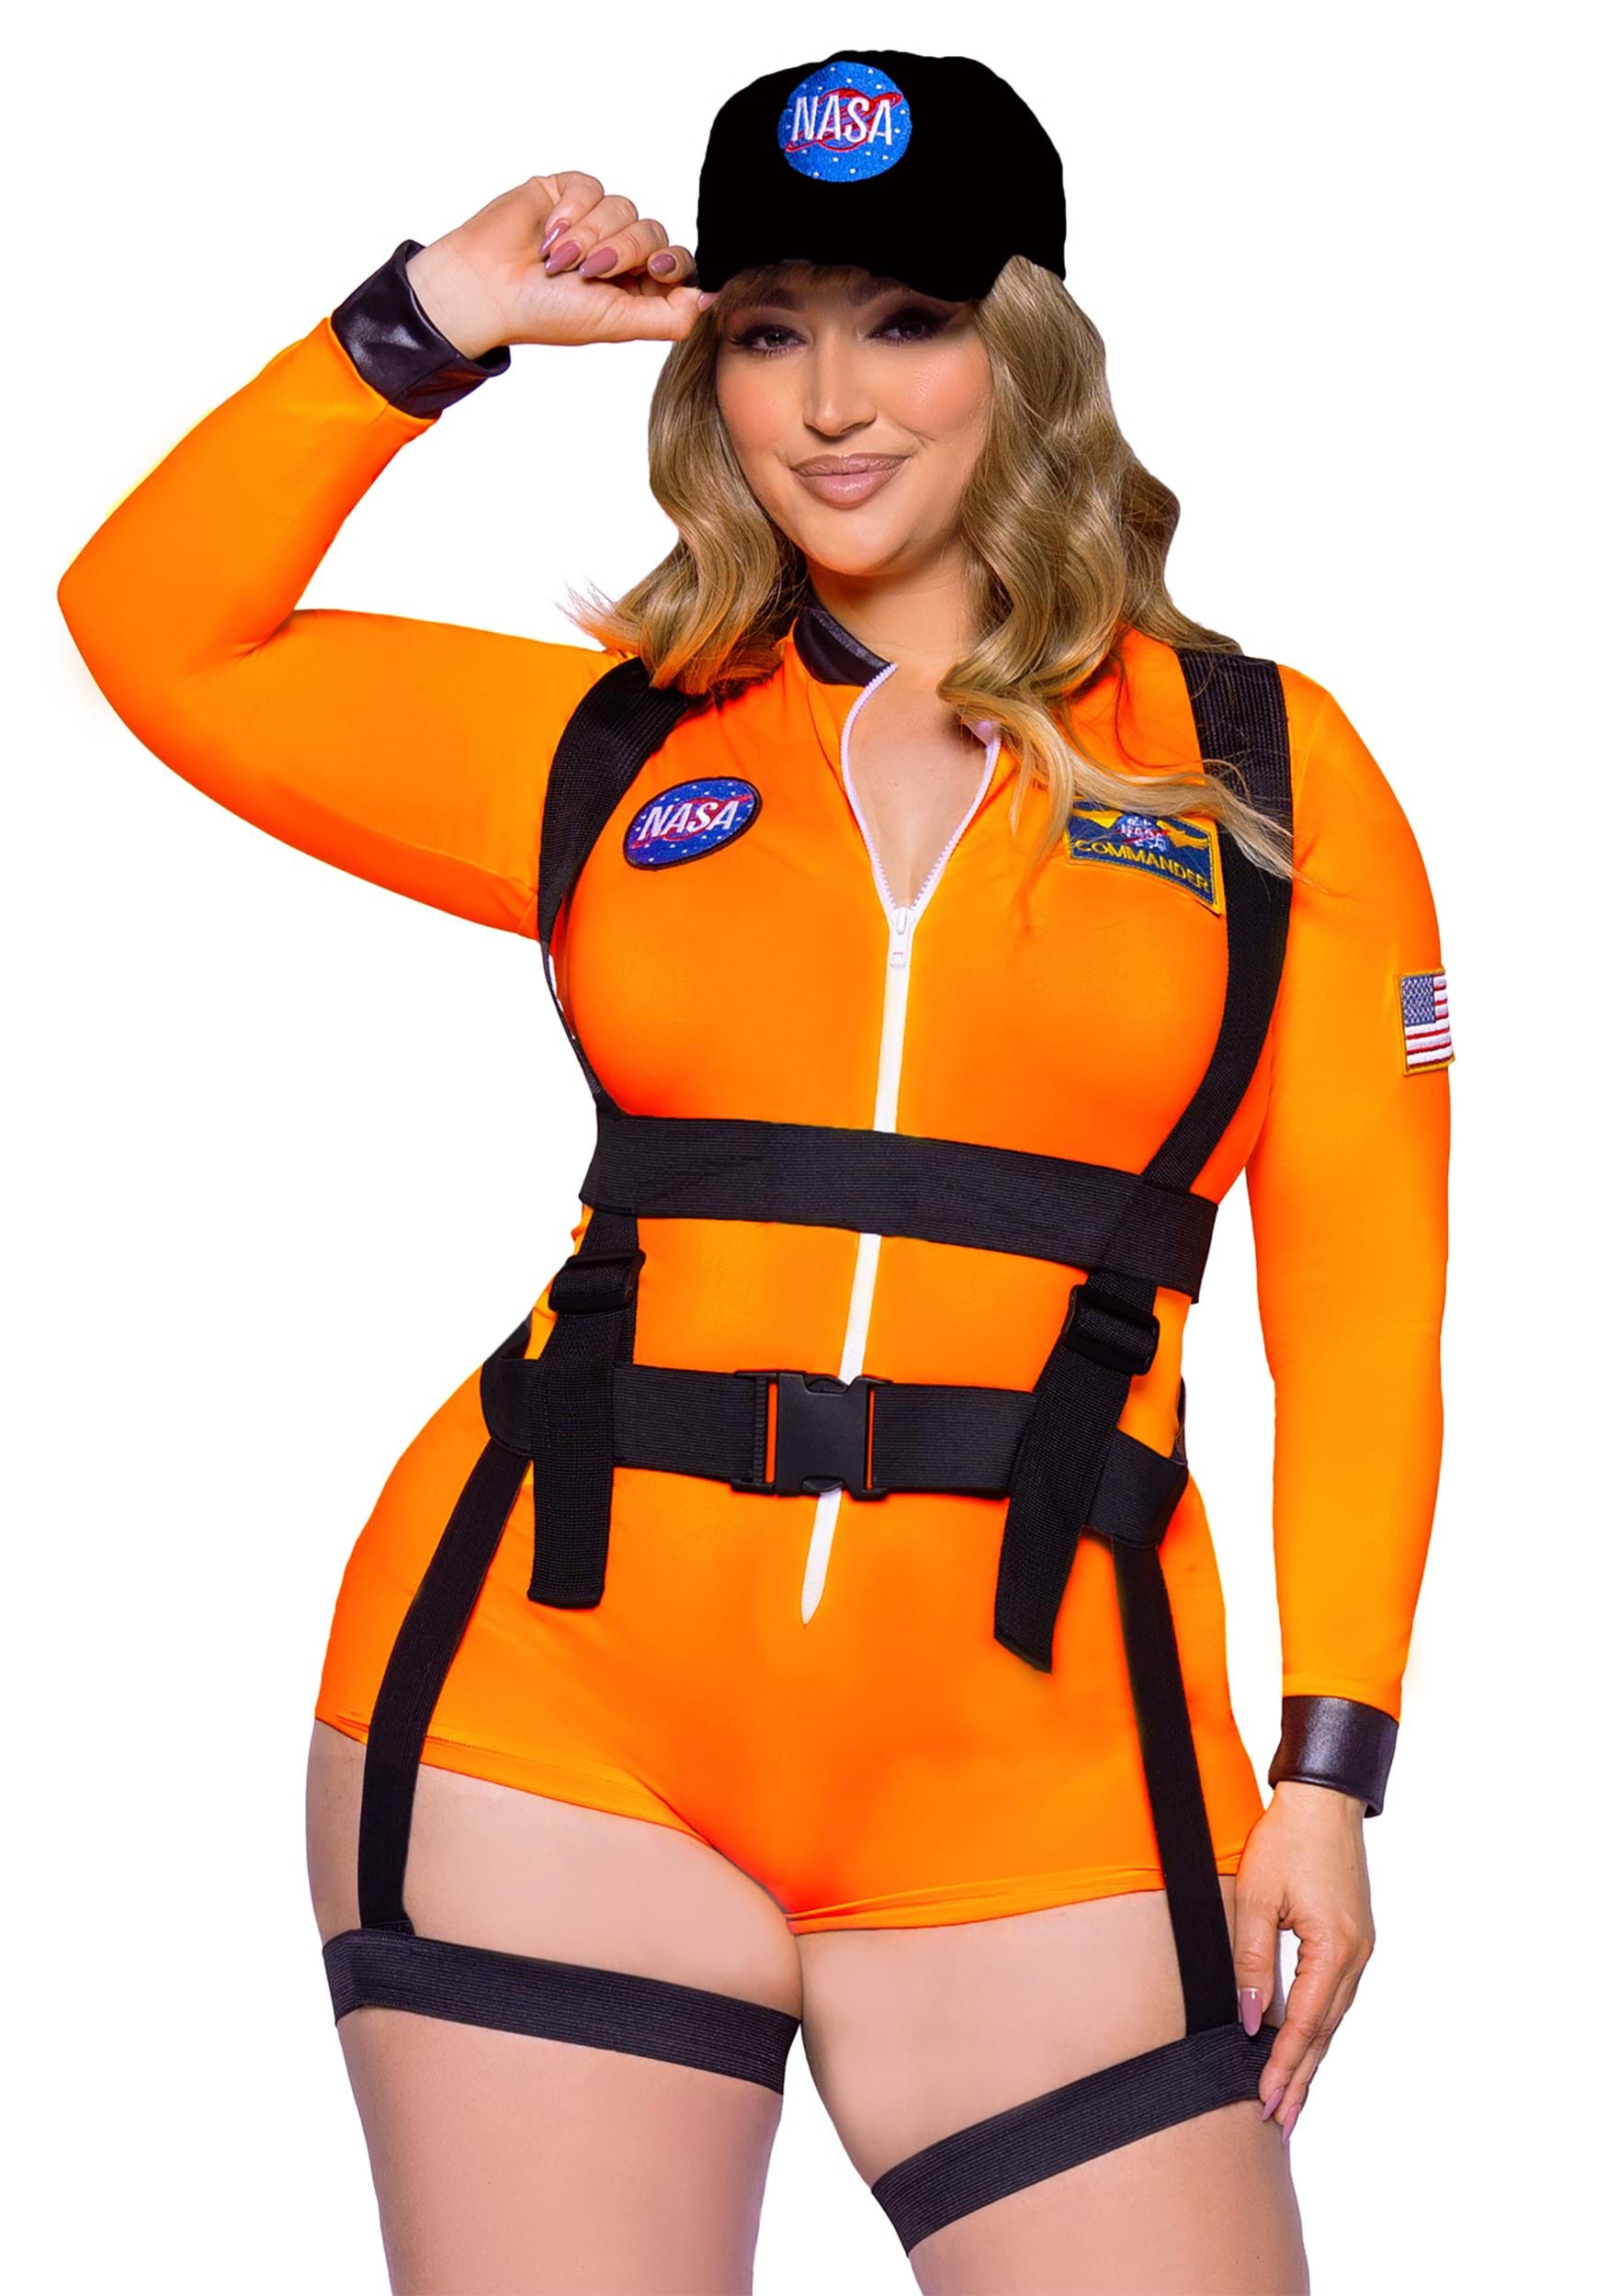 Women’s Sexy Plus Size Space Command Costume